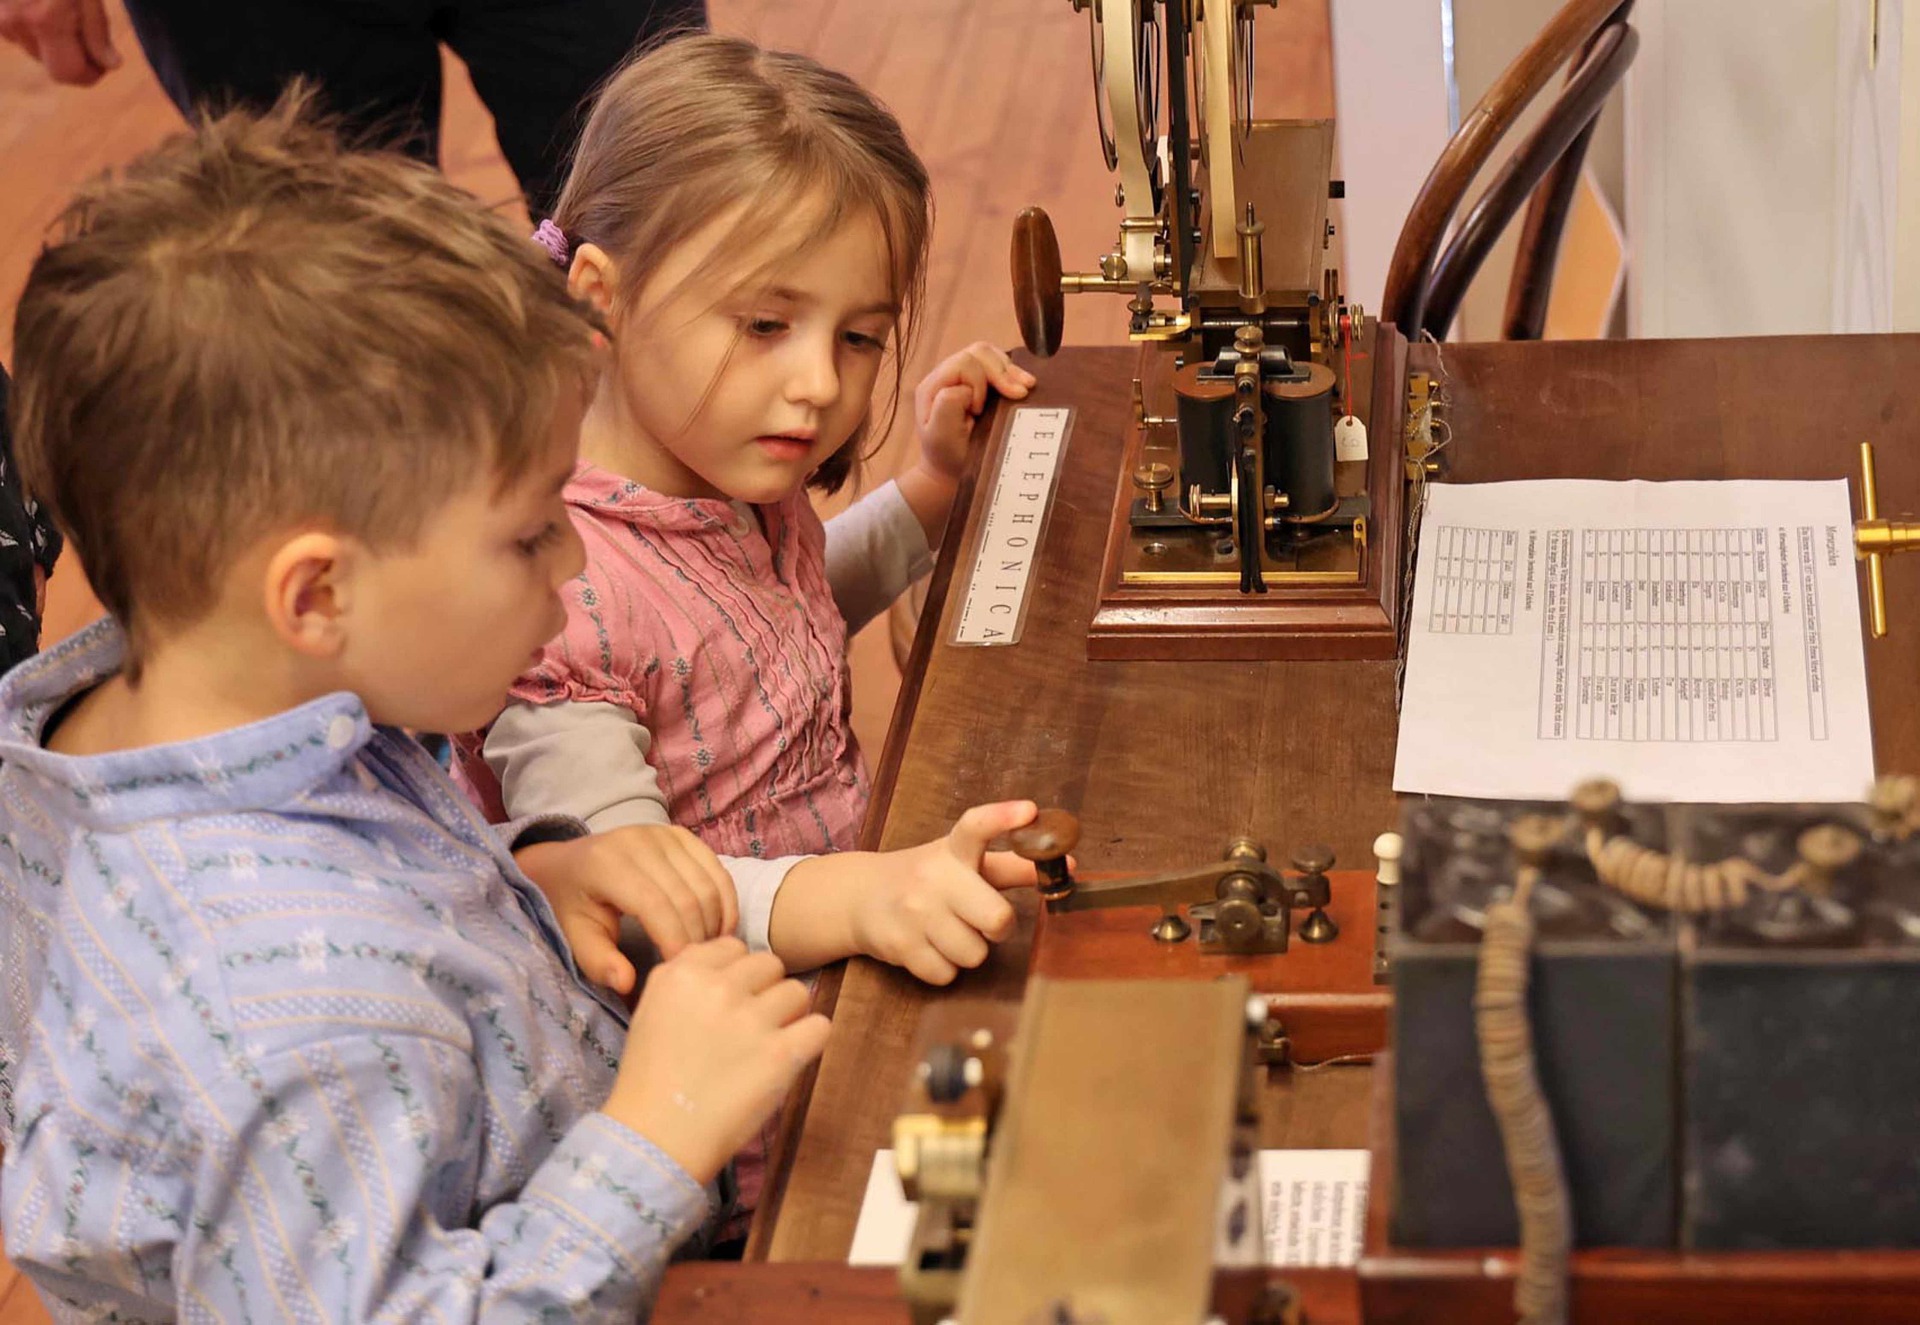 Wrocław’s Interactive Museums: Engage and Educate with Hands-on Exhibits